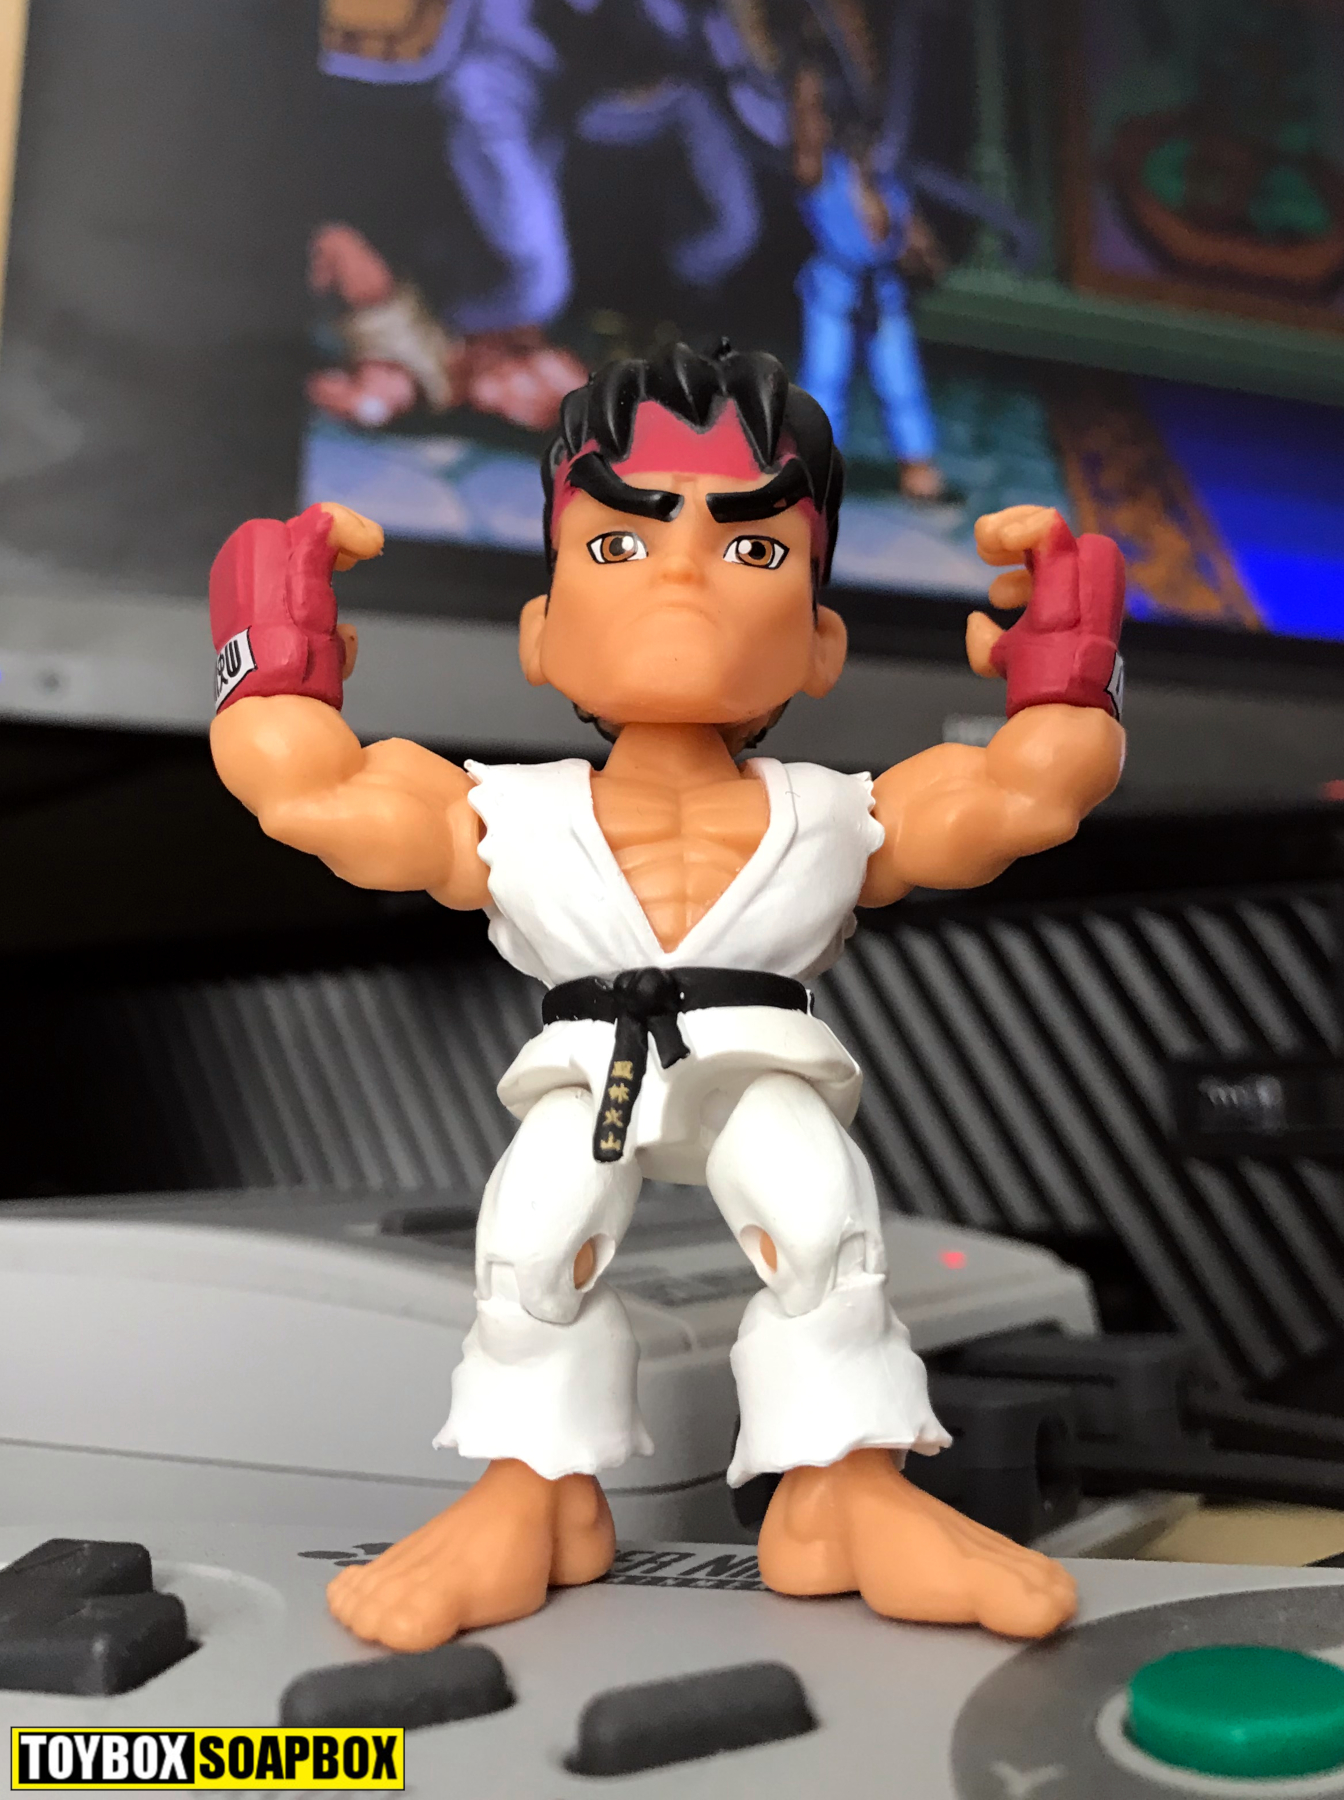 Super Street Fighter 2 (Ryu Victory Pose)